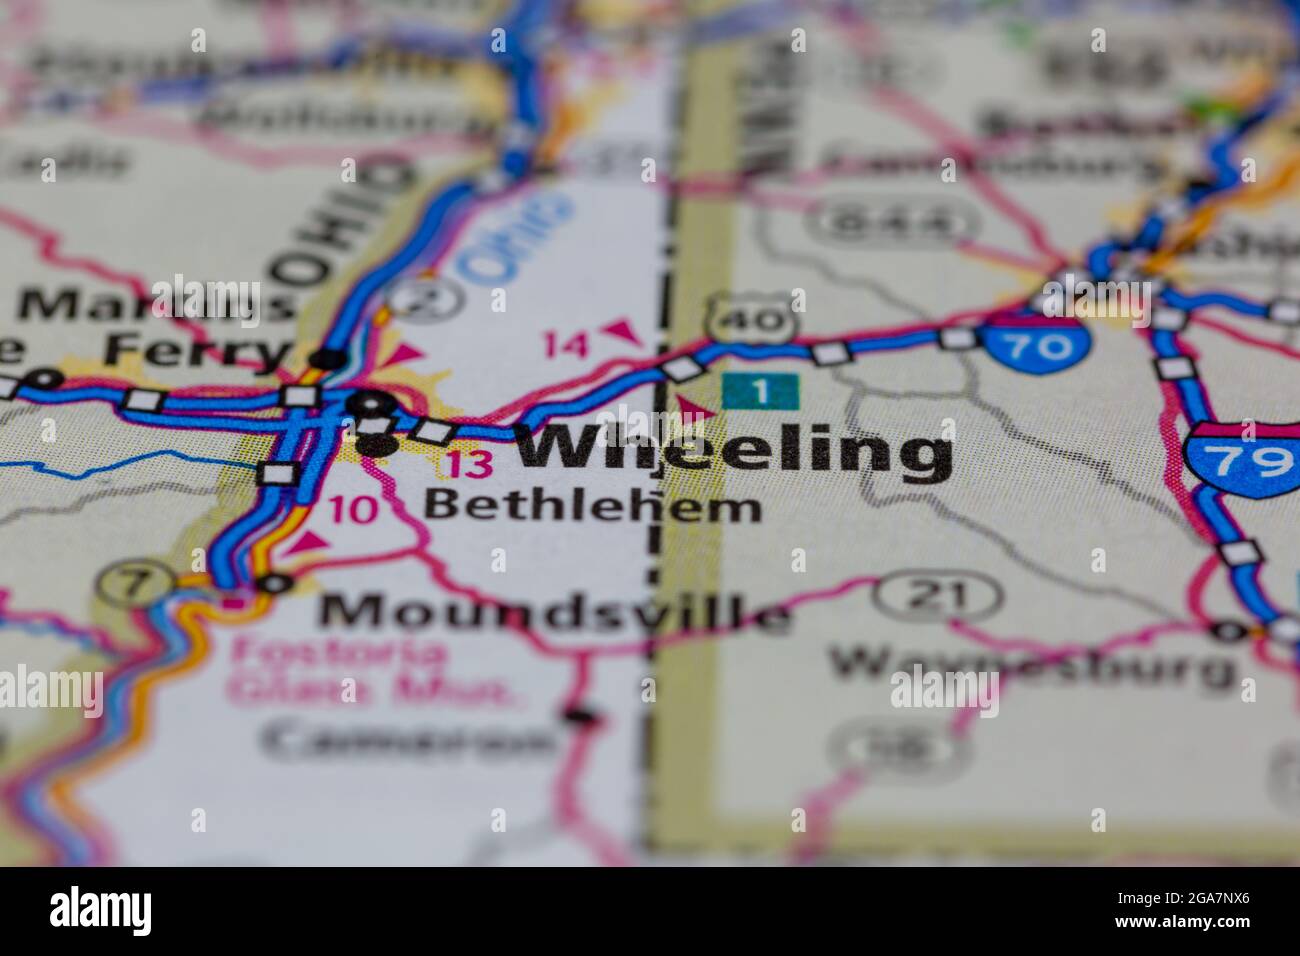 Wheeling Virginia shown on a road map or Geography map Stock Photo